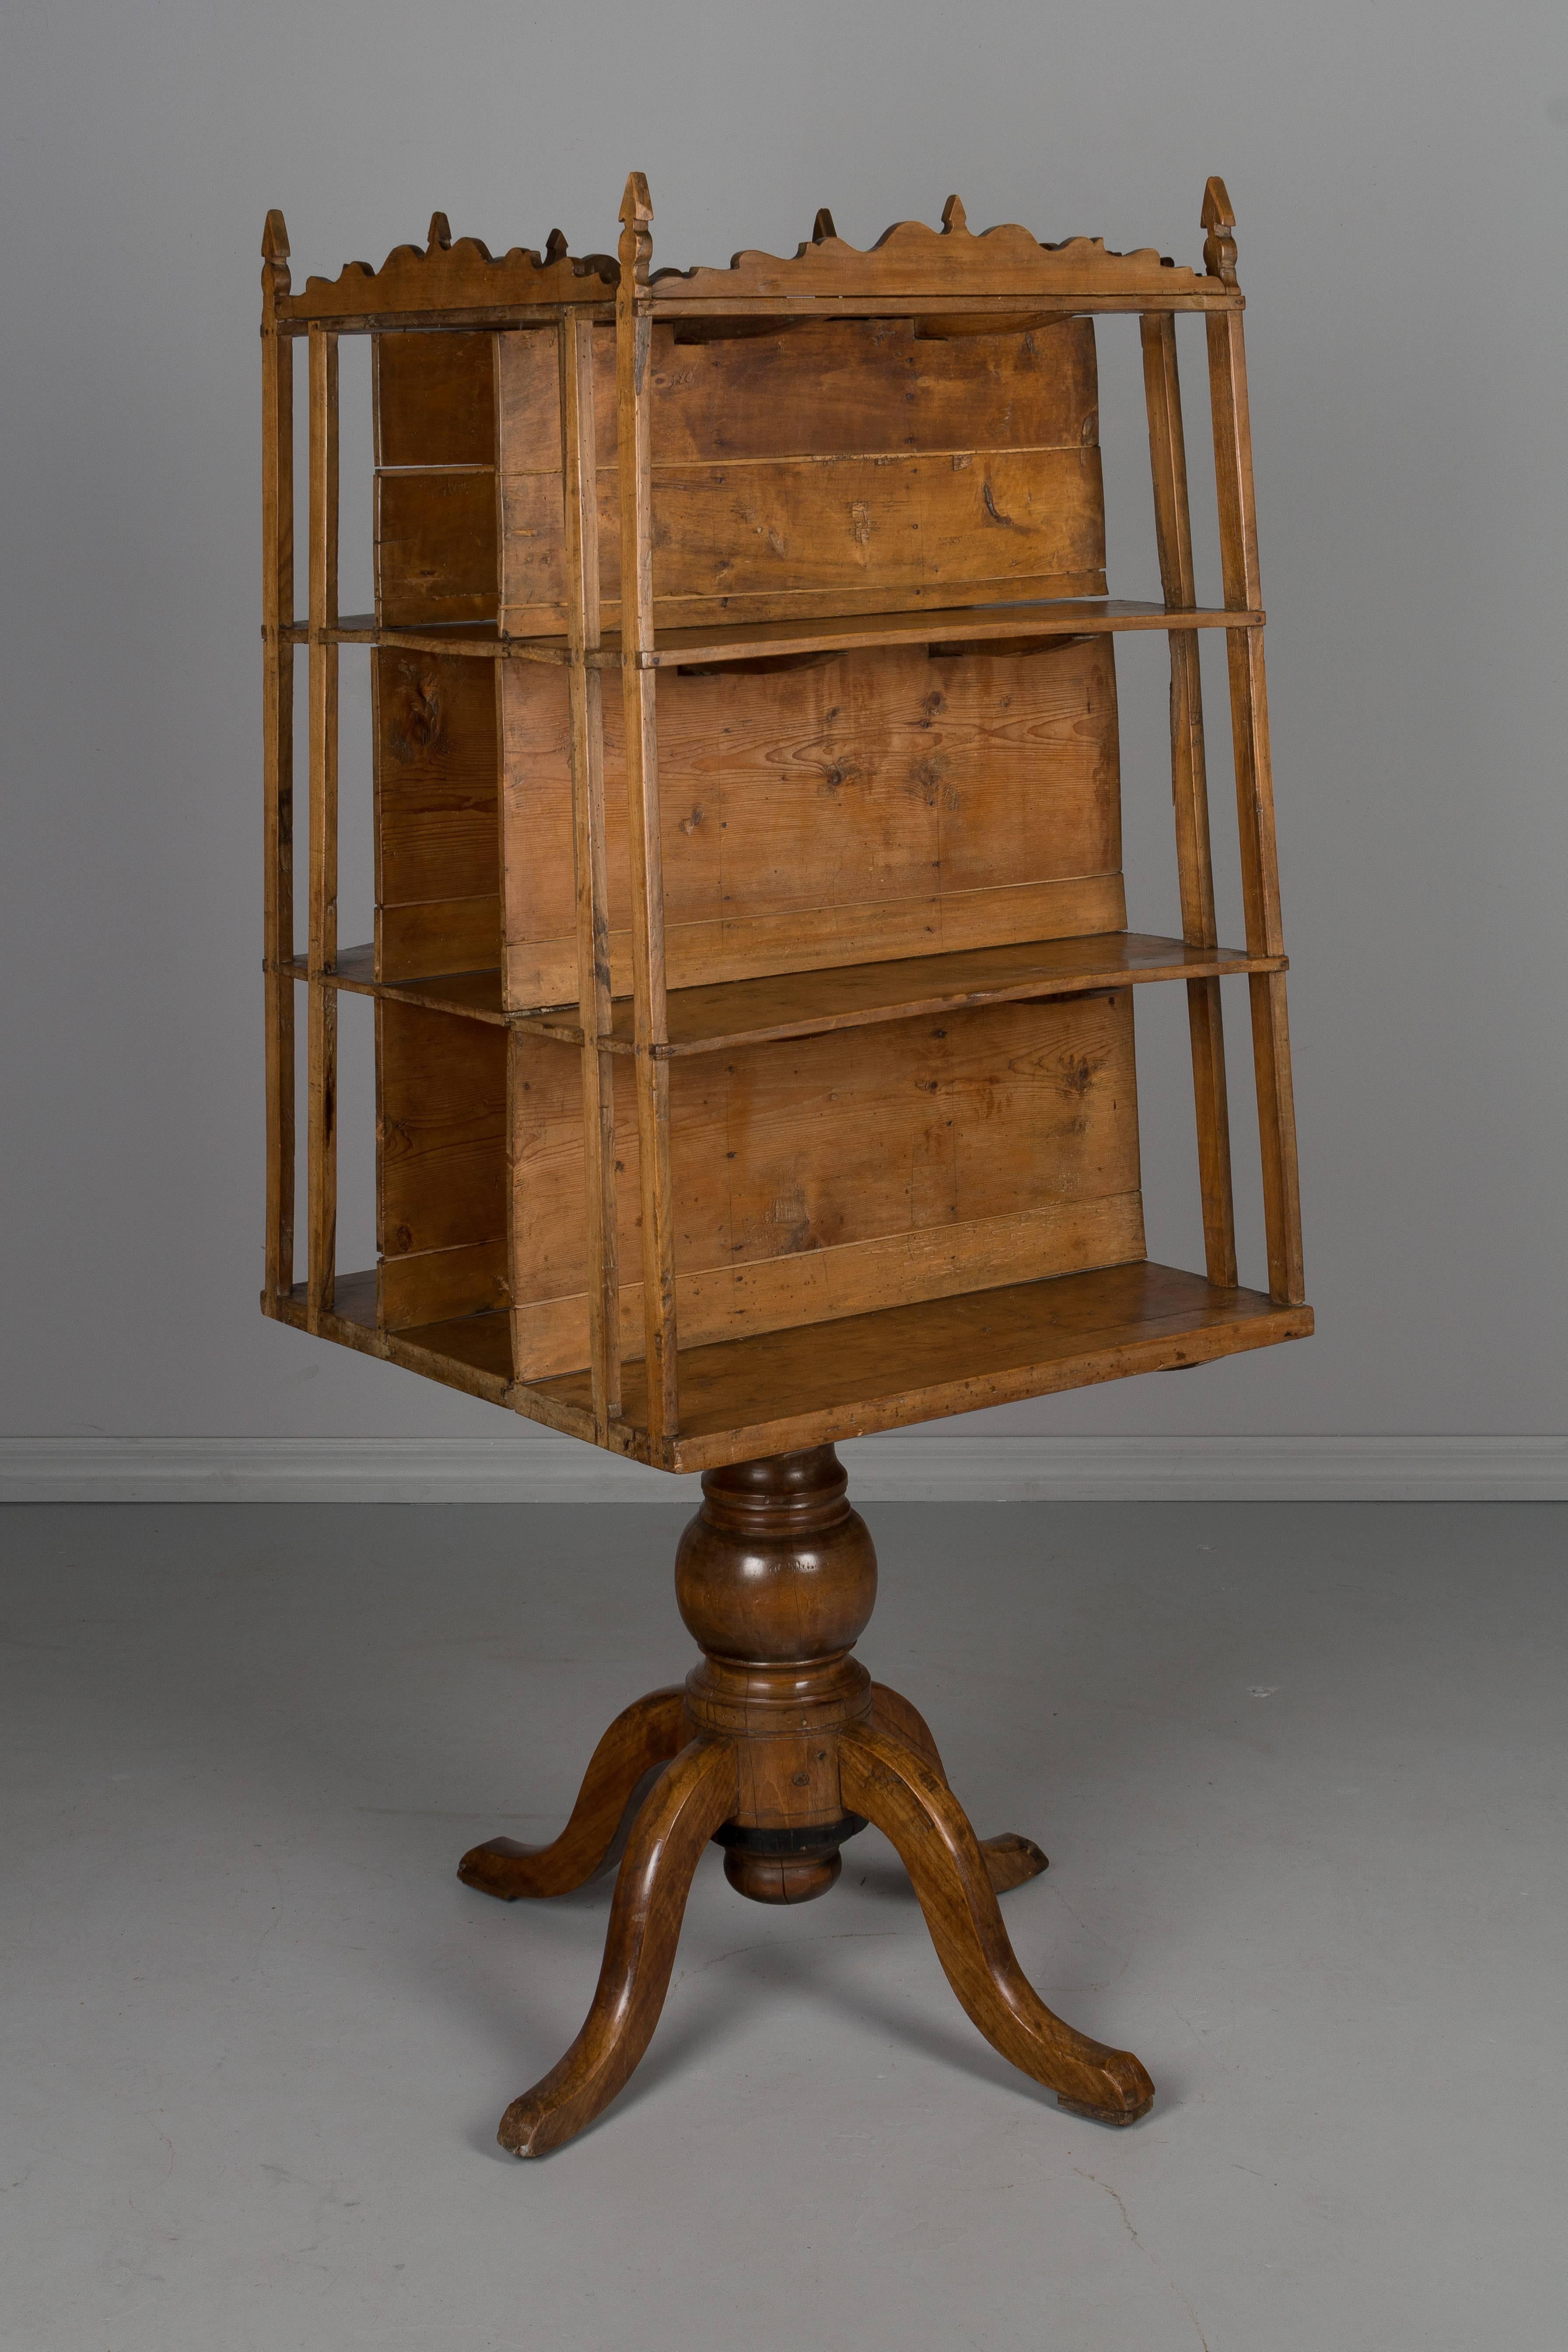 A 19th century French rustic rotating bookshelf made of cherrywood. In two parts, the book shelf has a hole through the middle and fits onto the post of the heavy turned pedestal base. Simple decorative trim at the top. This was used as a store